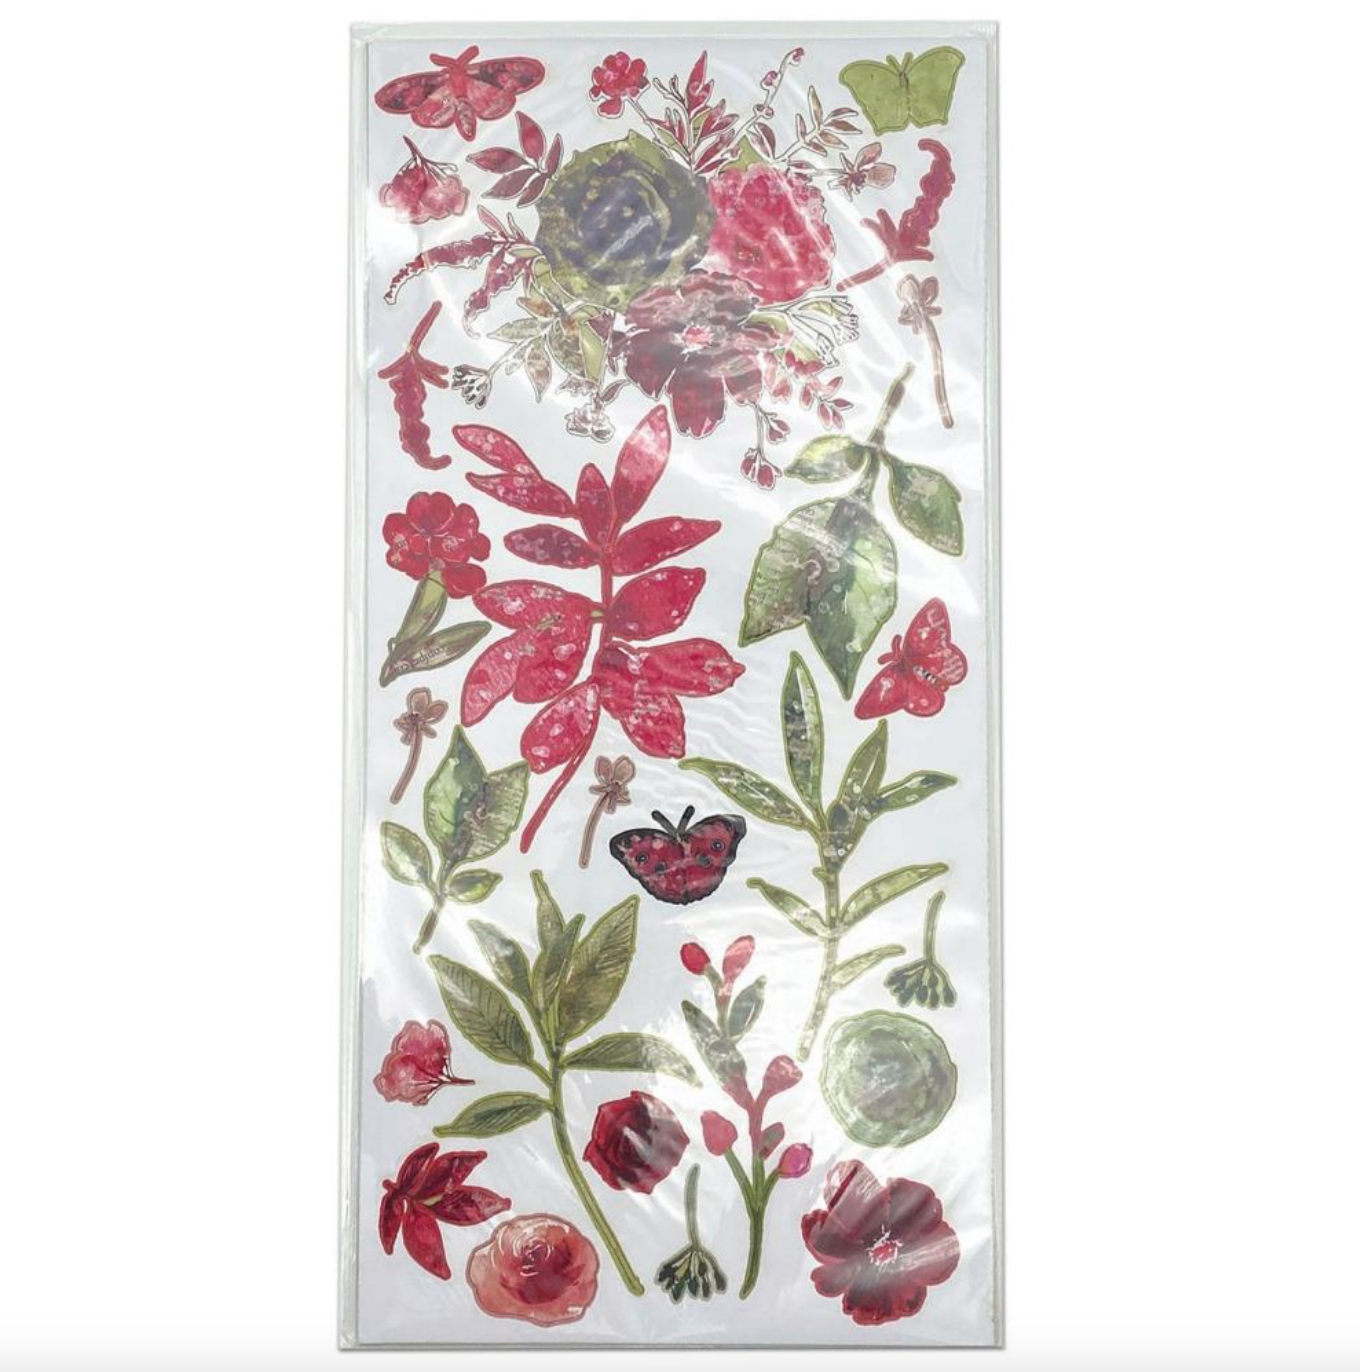 Laser Cut Outs - Wildflowers - Art Options Rouge - 49 And Market